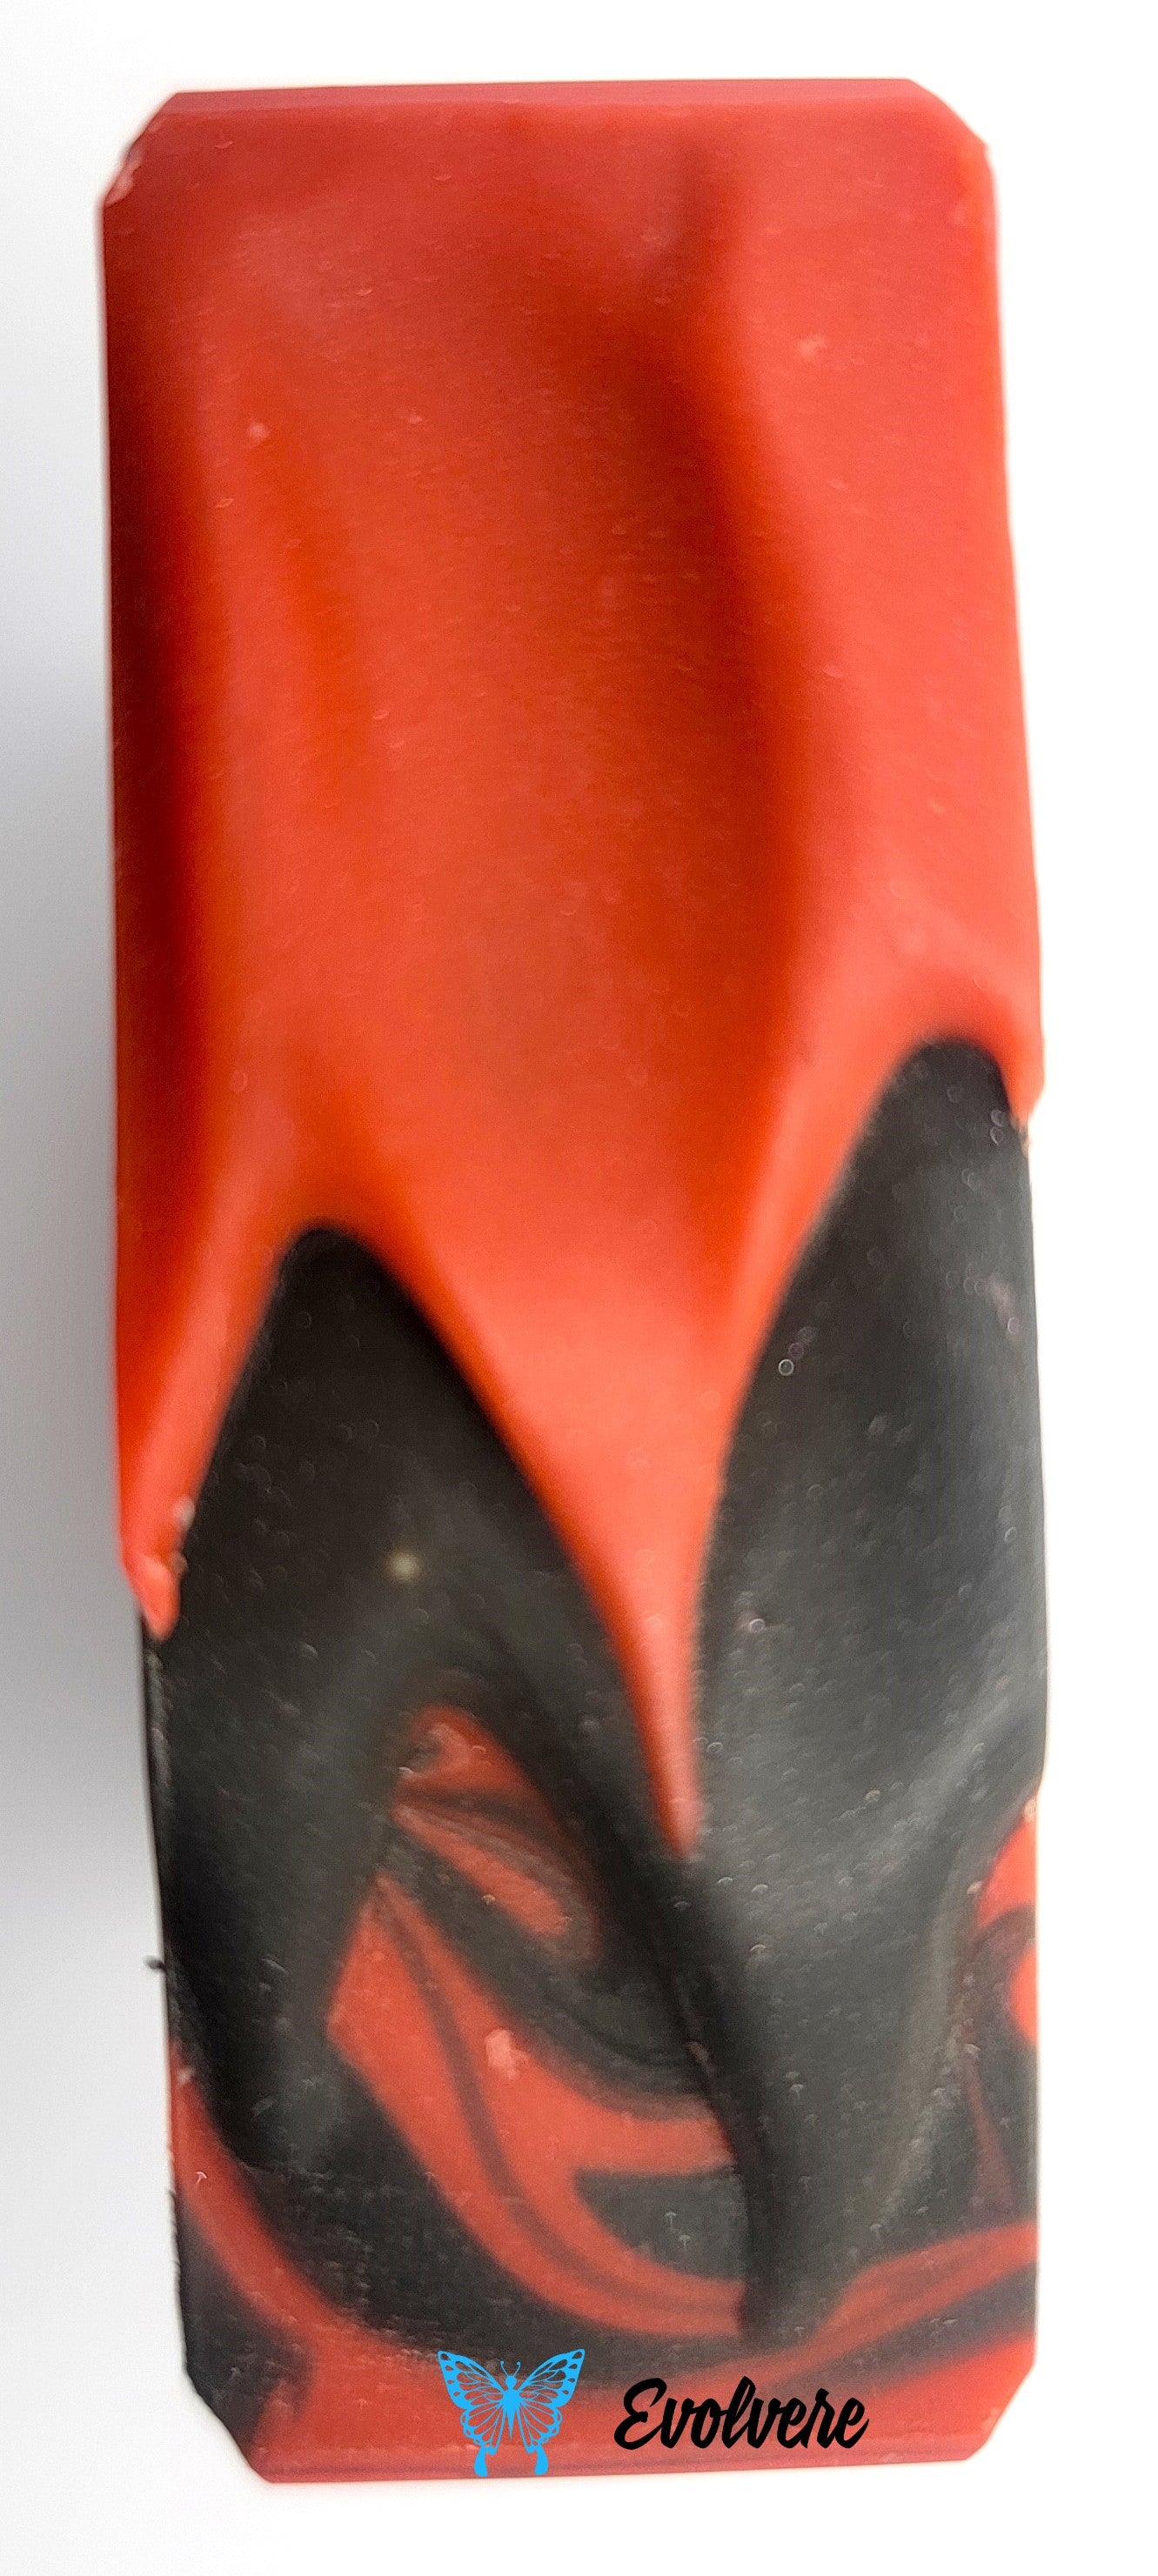 Black and Red Swirled Soap Top